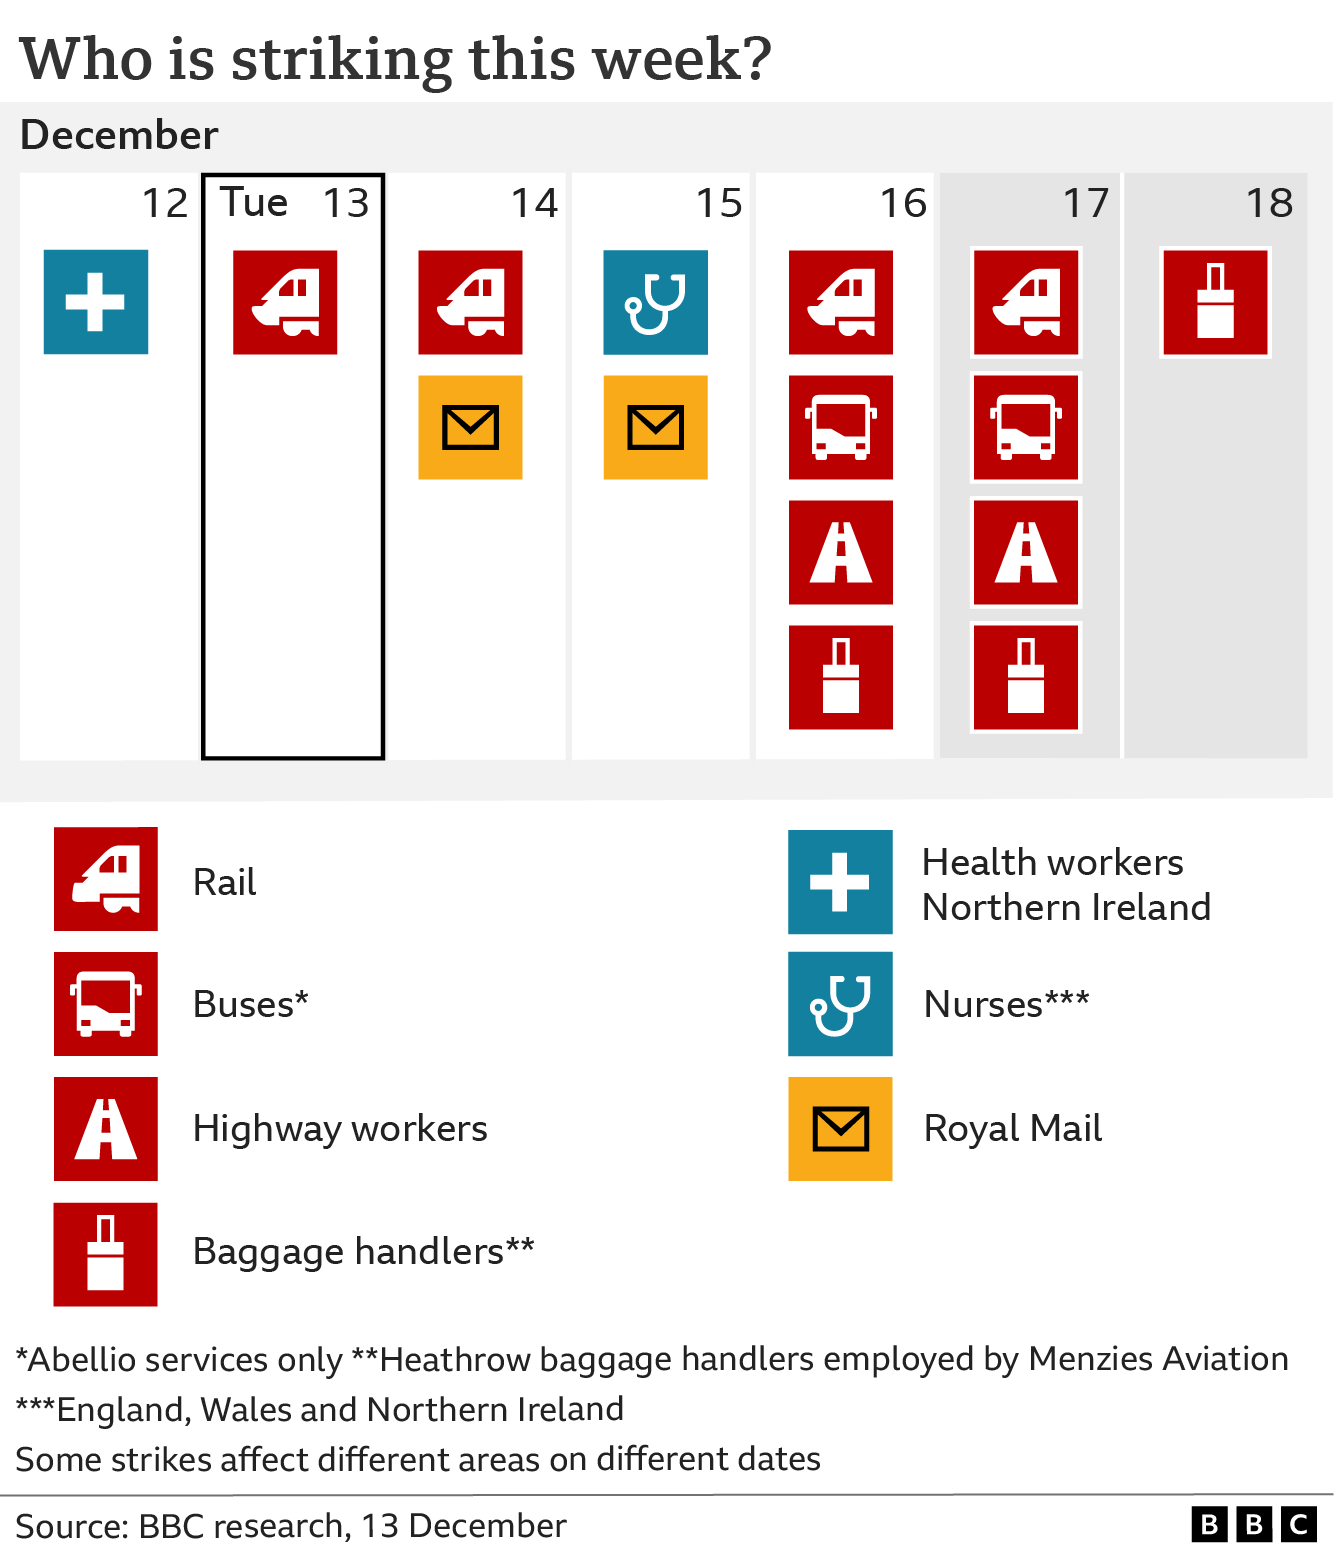 Chart: Industrial action in the week starting with 12 December include rail strikes on Tuesday, Wednesday, on Friday and Saturday when they will be joined by some bus companies. Royal Mail workers will strike on Wednesday and Thursday. Nurses will strike on Thursday and in Northern Ireland, healthcare workers will strike on Monday.